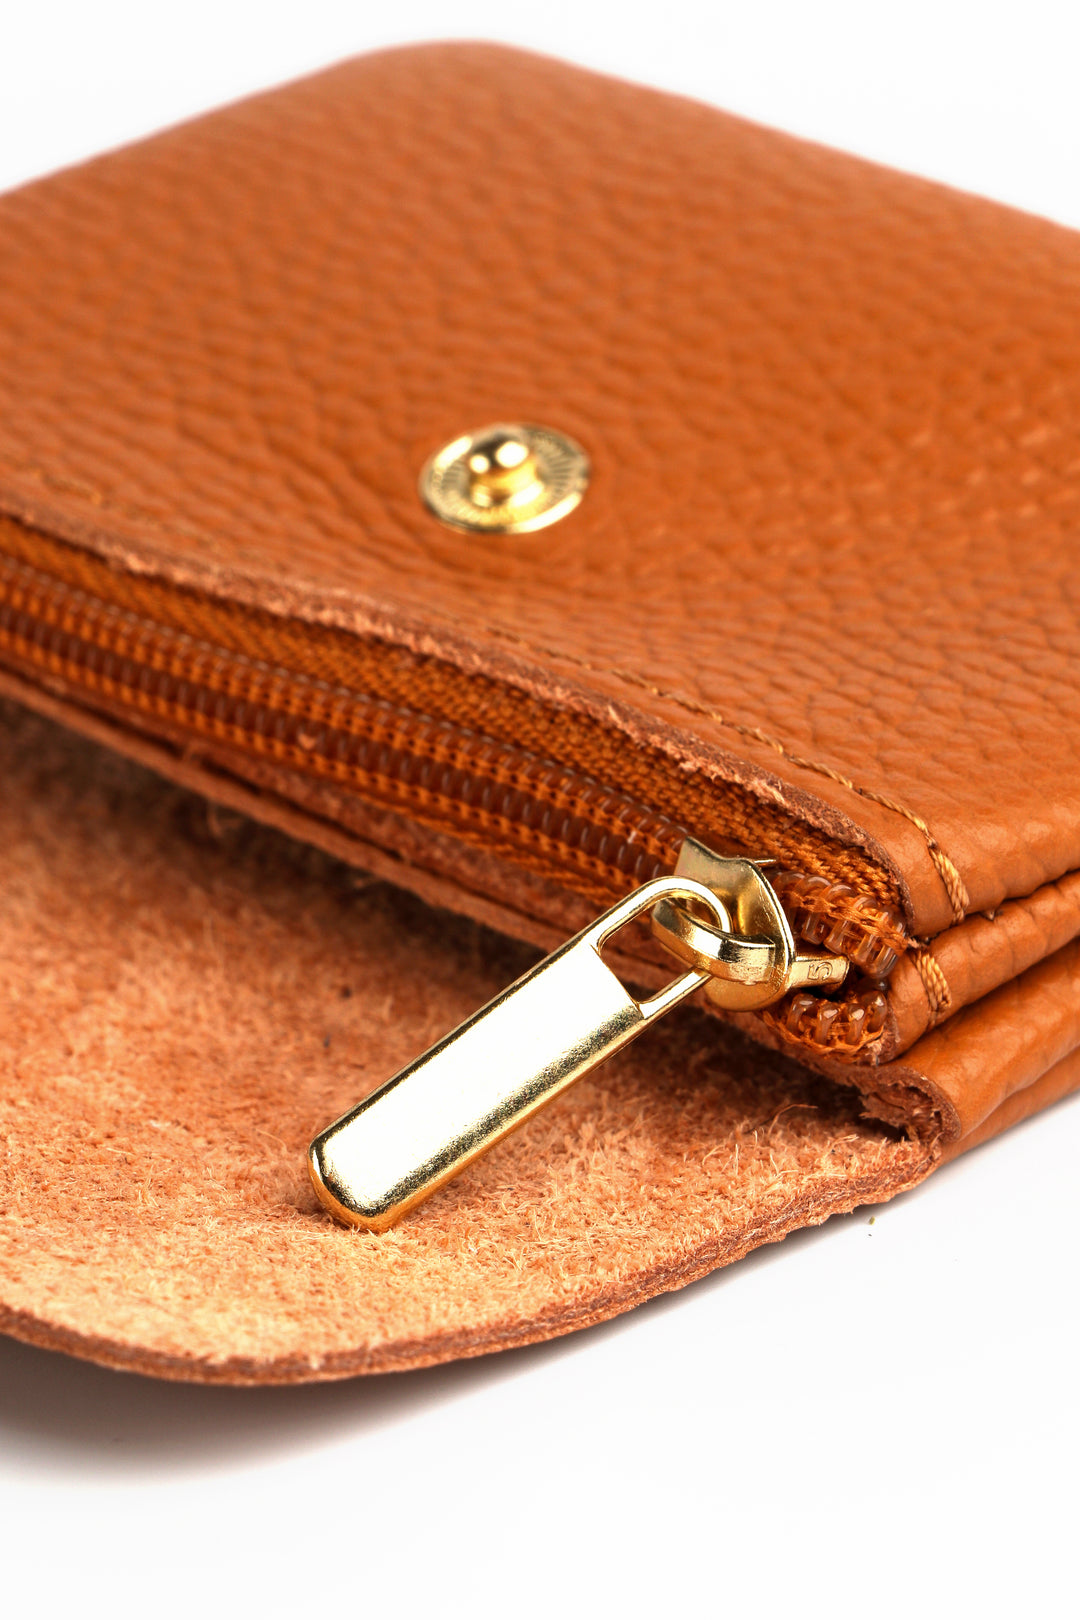 showing the inside of the leather coin purse showing an internal zip closure compartment